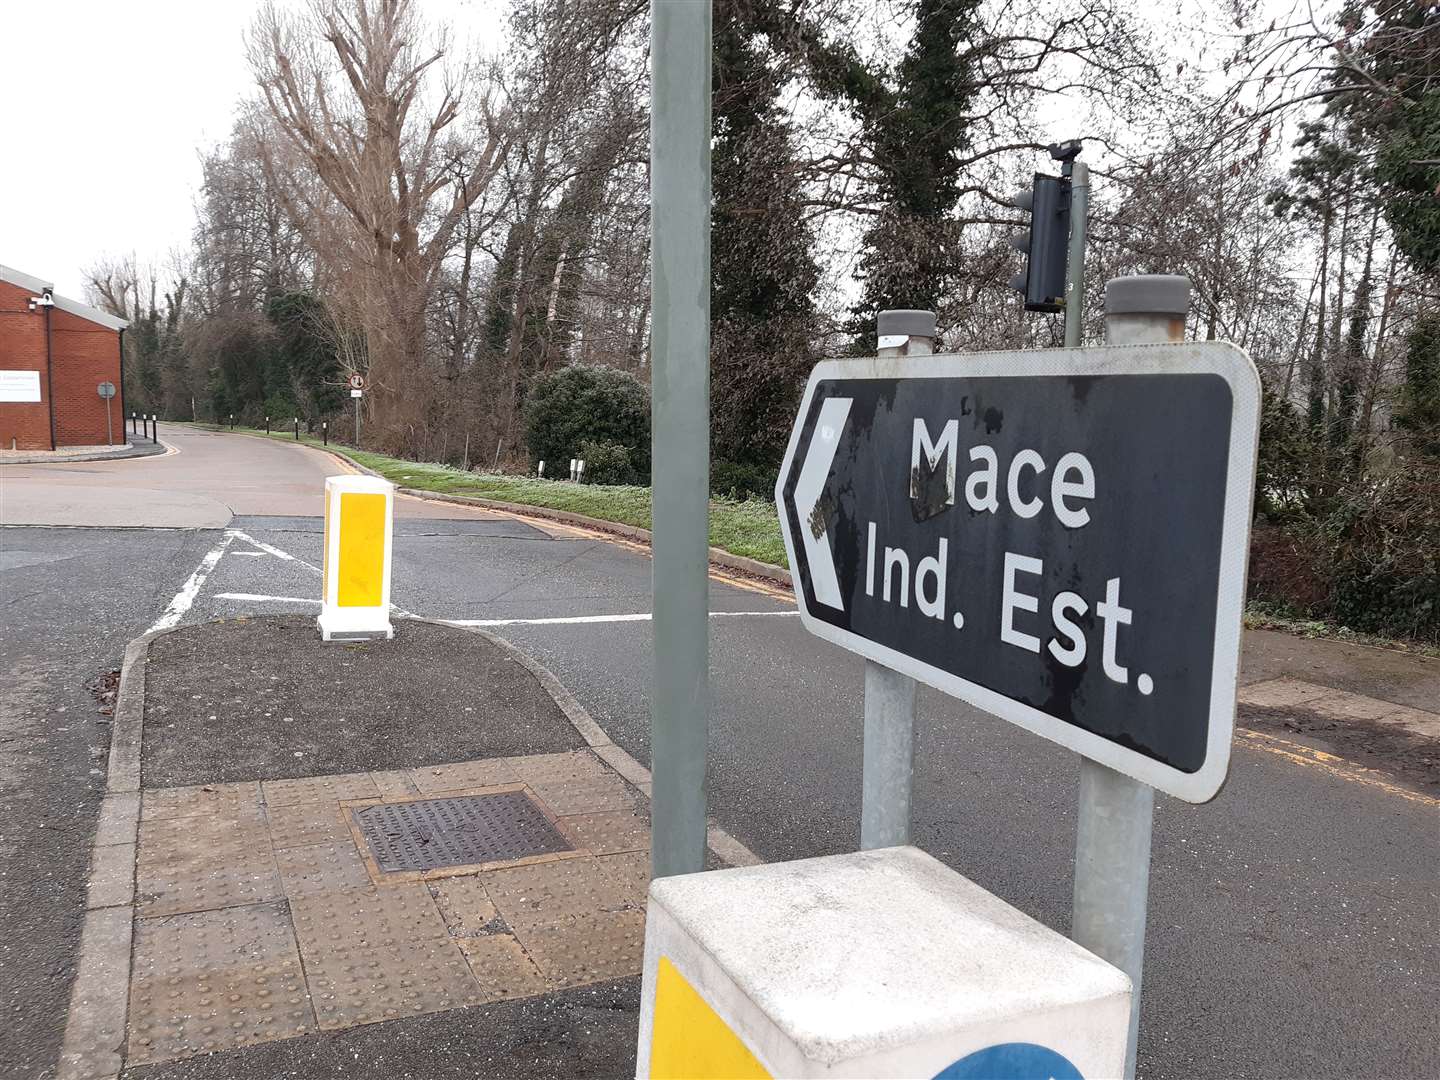 The entrance to the Mace Industrial Estate off Mace Lane